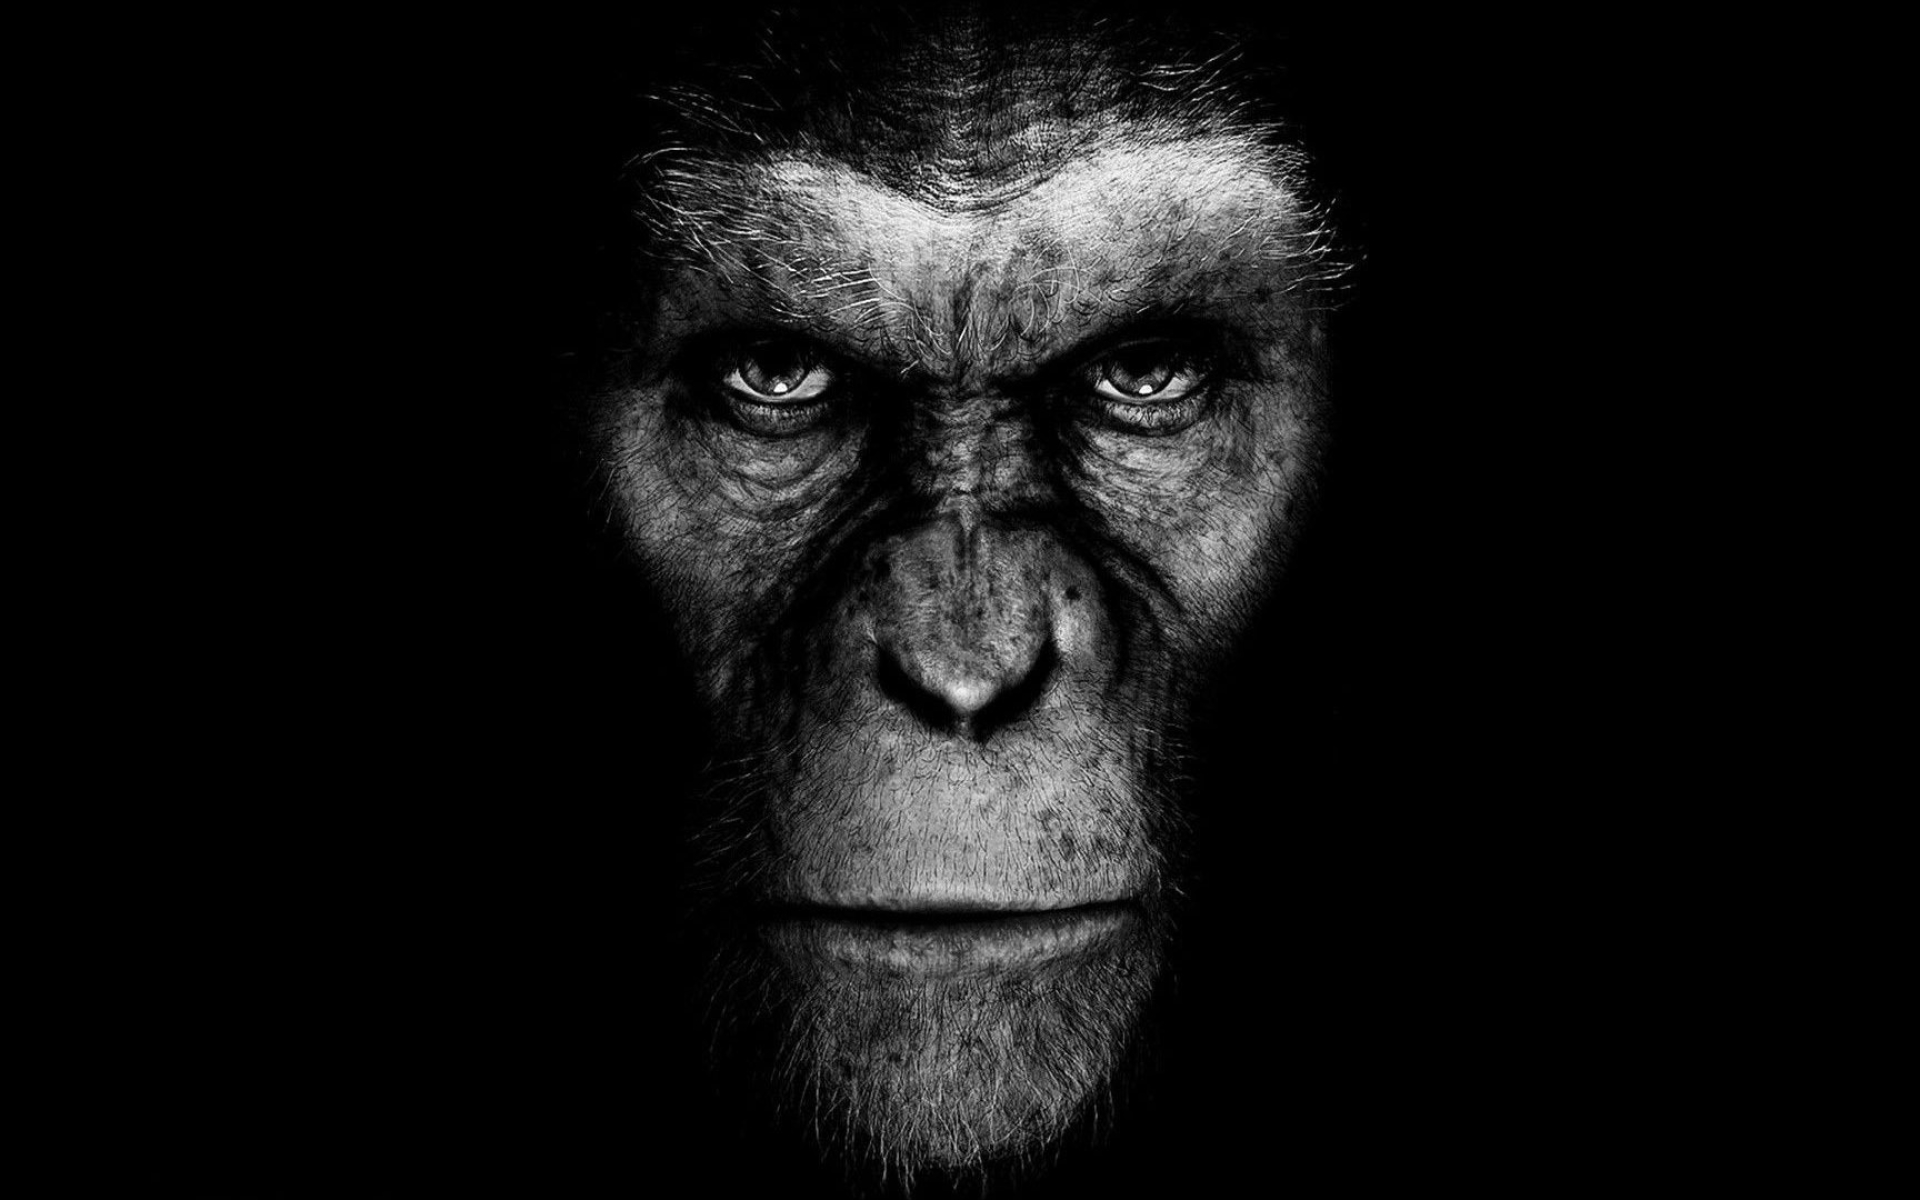 Planet of the Apes, Movie franchise, Rise of the Apes, Visually stunning, 1920x1200 HD Desktop